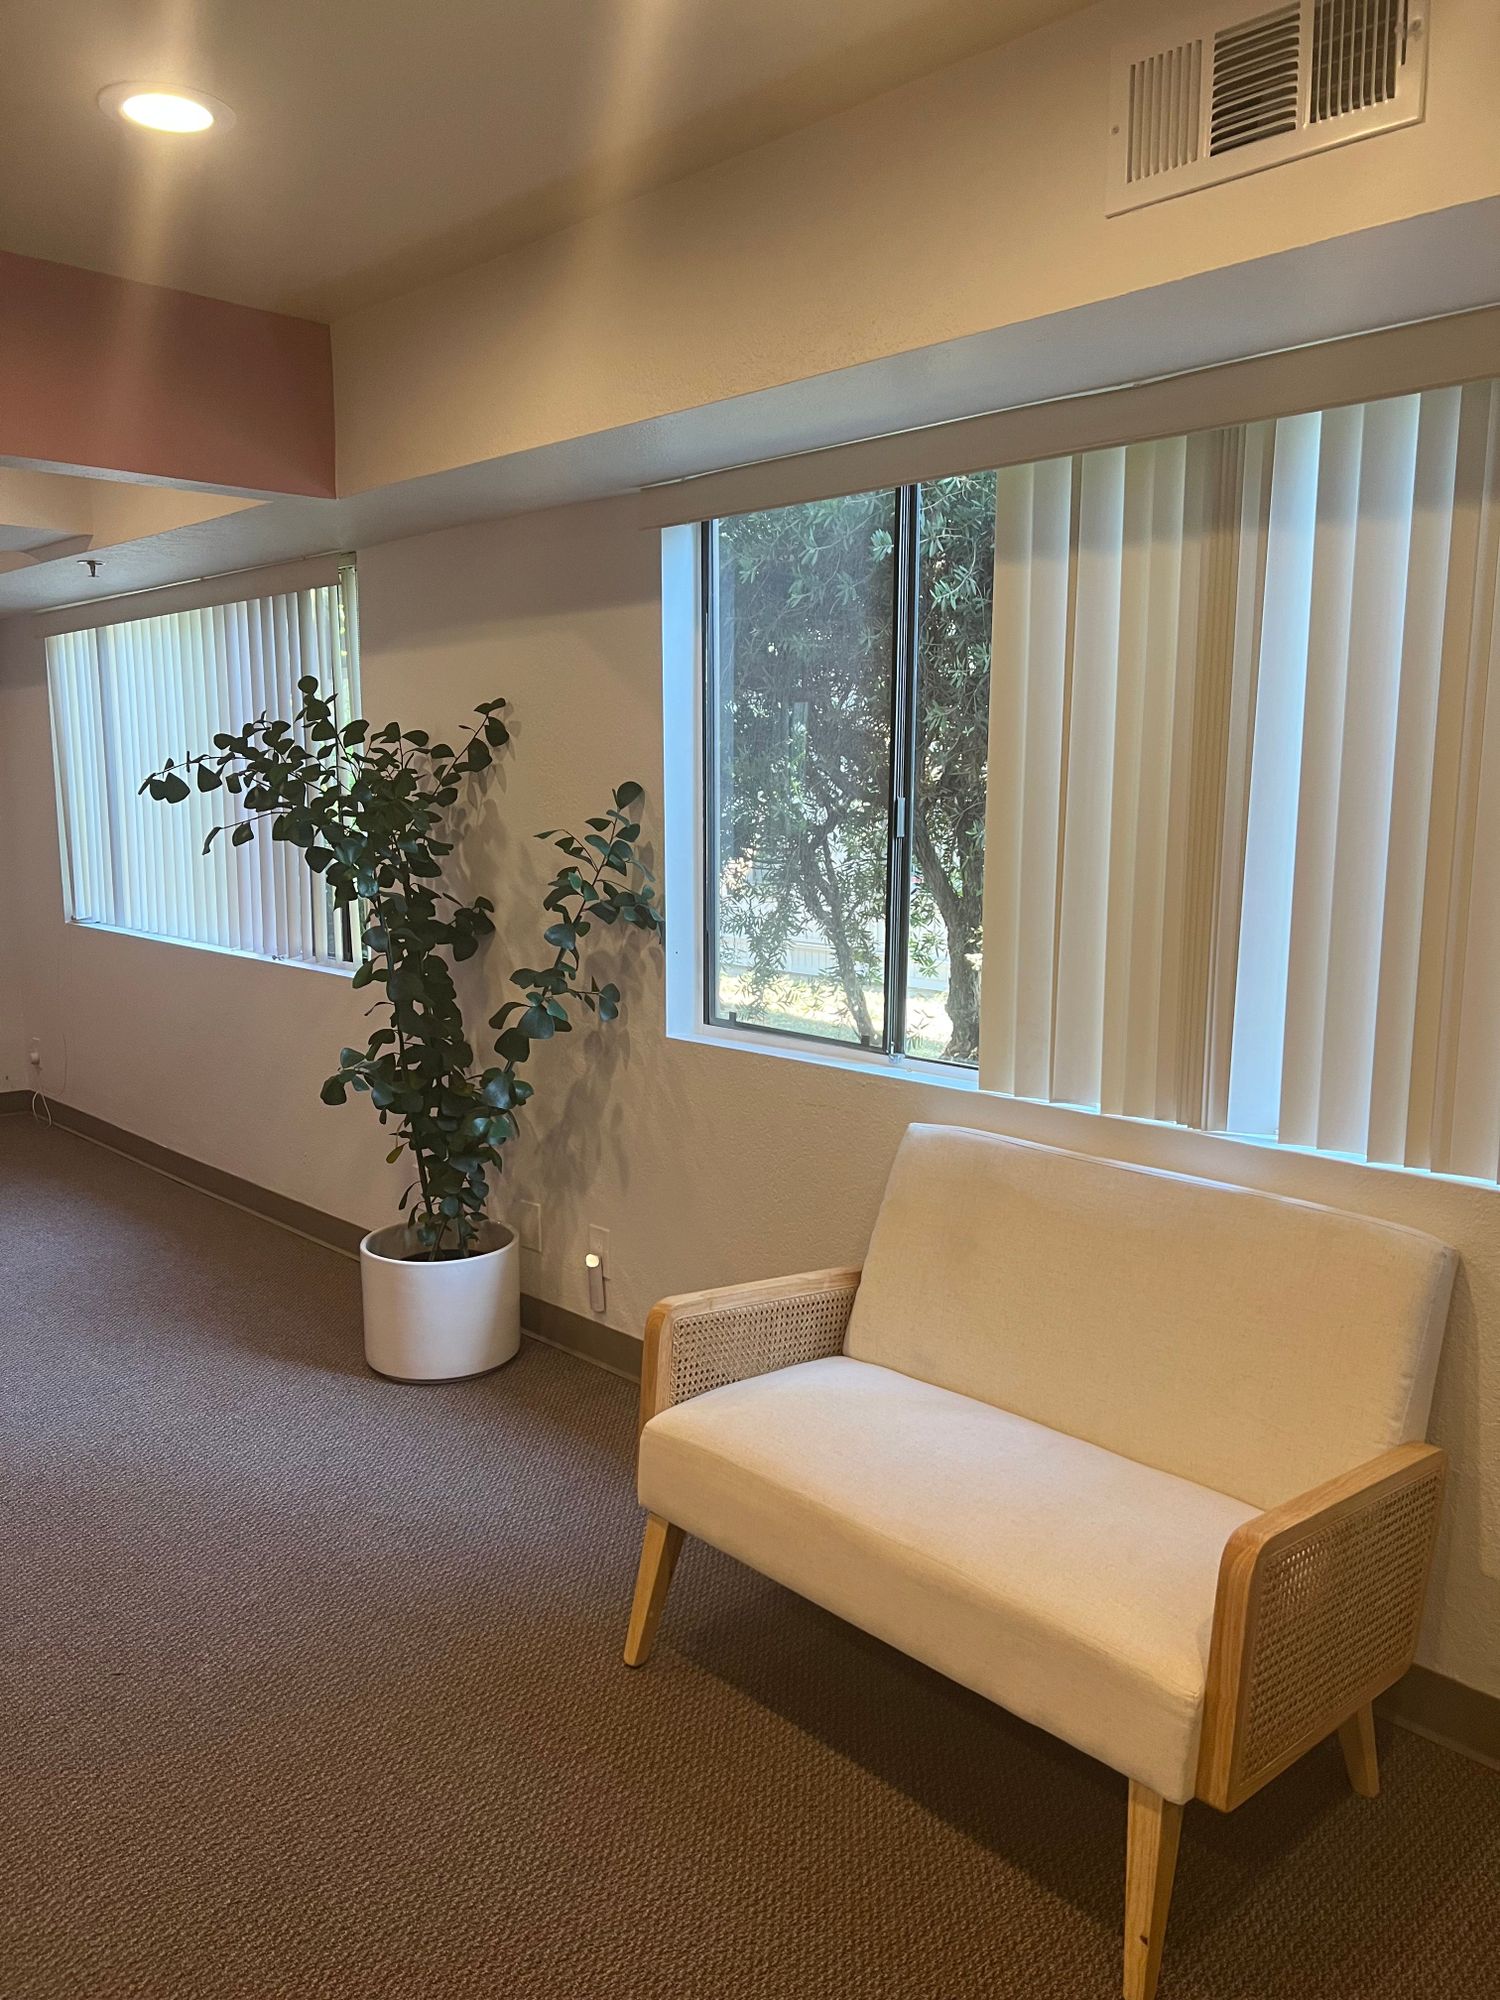 Gallery Photo of Waiting Room 